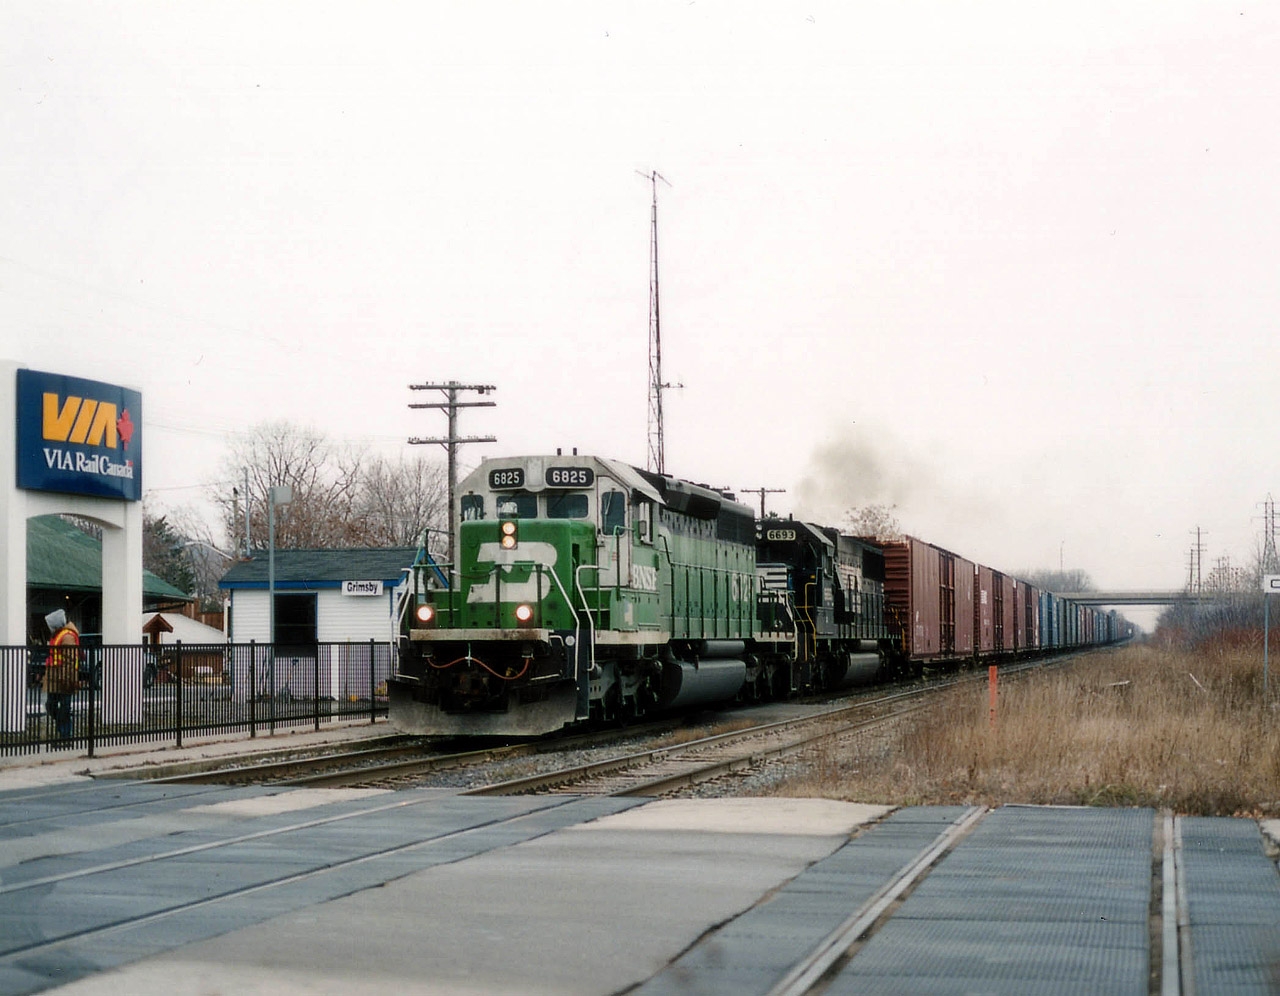 NS train #328 heading from St. Thomas (Talbotville) to Buffalo, autoparts, daily, always had a surprise in its' power consist. Or so it seemed. Here's one of my favourite schemes, that white & green faced BNSF leading a NS 6693 as it roars past the town VIA kiosk. Considerable expense went into setting up the new kiosk and a fancy sign; and of course what does VIA do? Cancel all operations down Niagara-way. Worse, the #328 is now history too. Getting quiet in ol' Grimsby-town. :o(